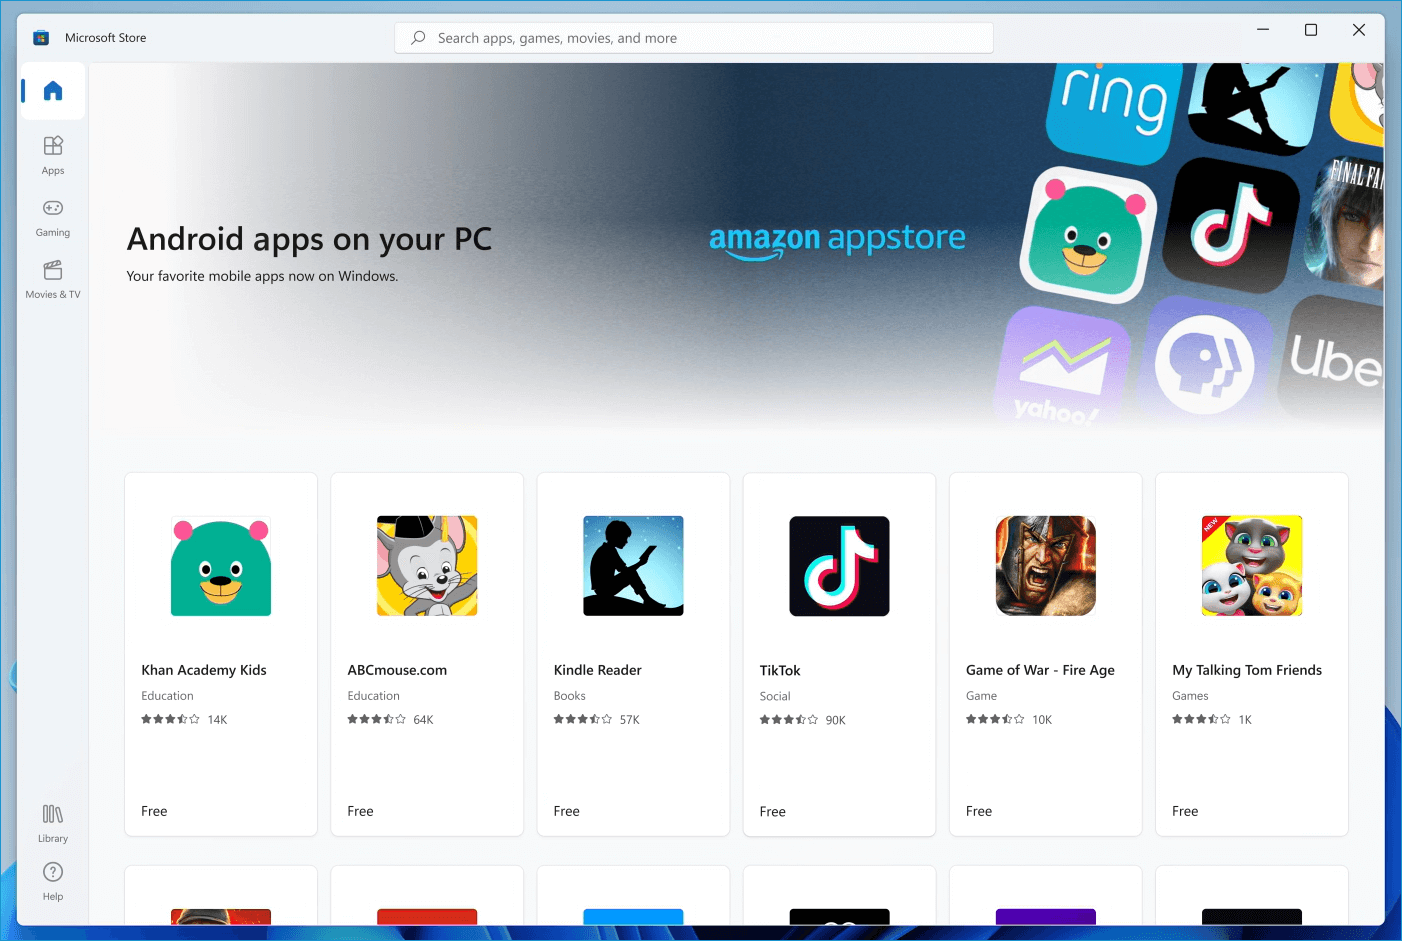 Homepage of the Microsoft Store